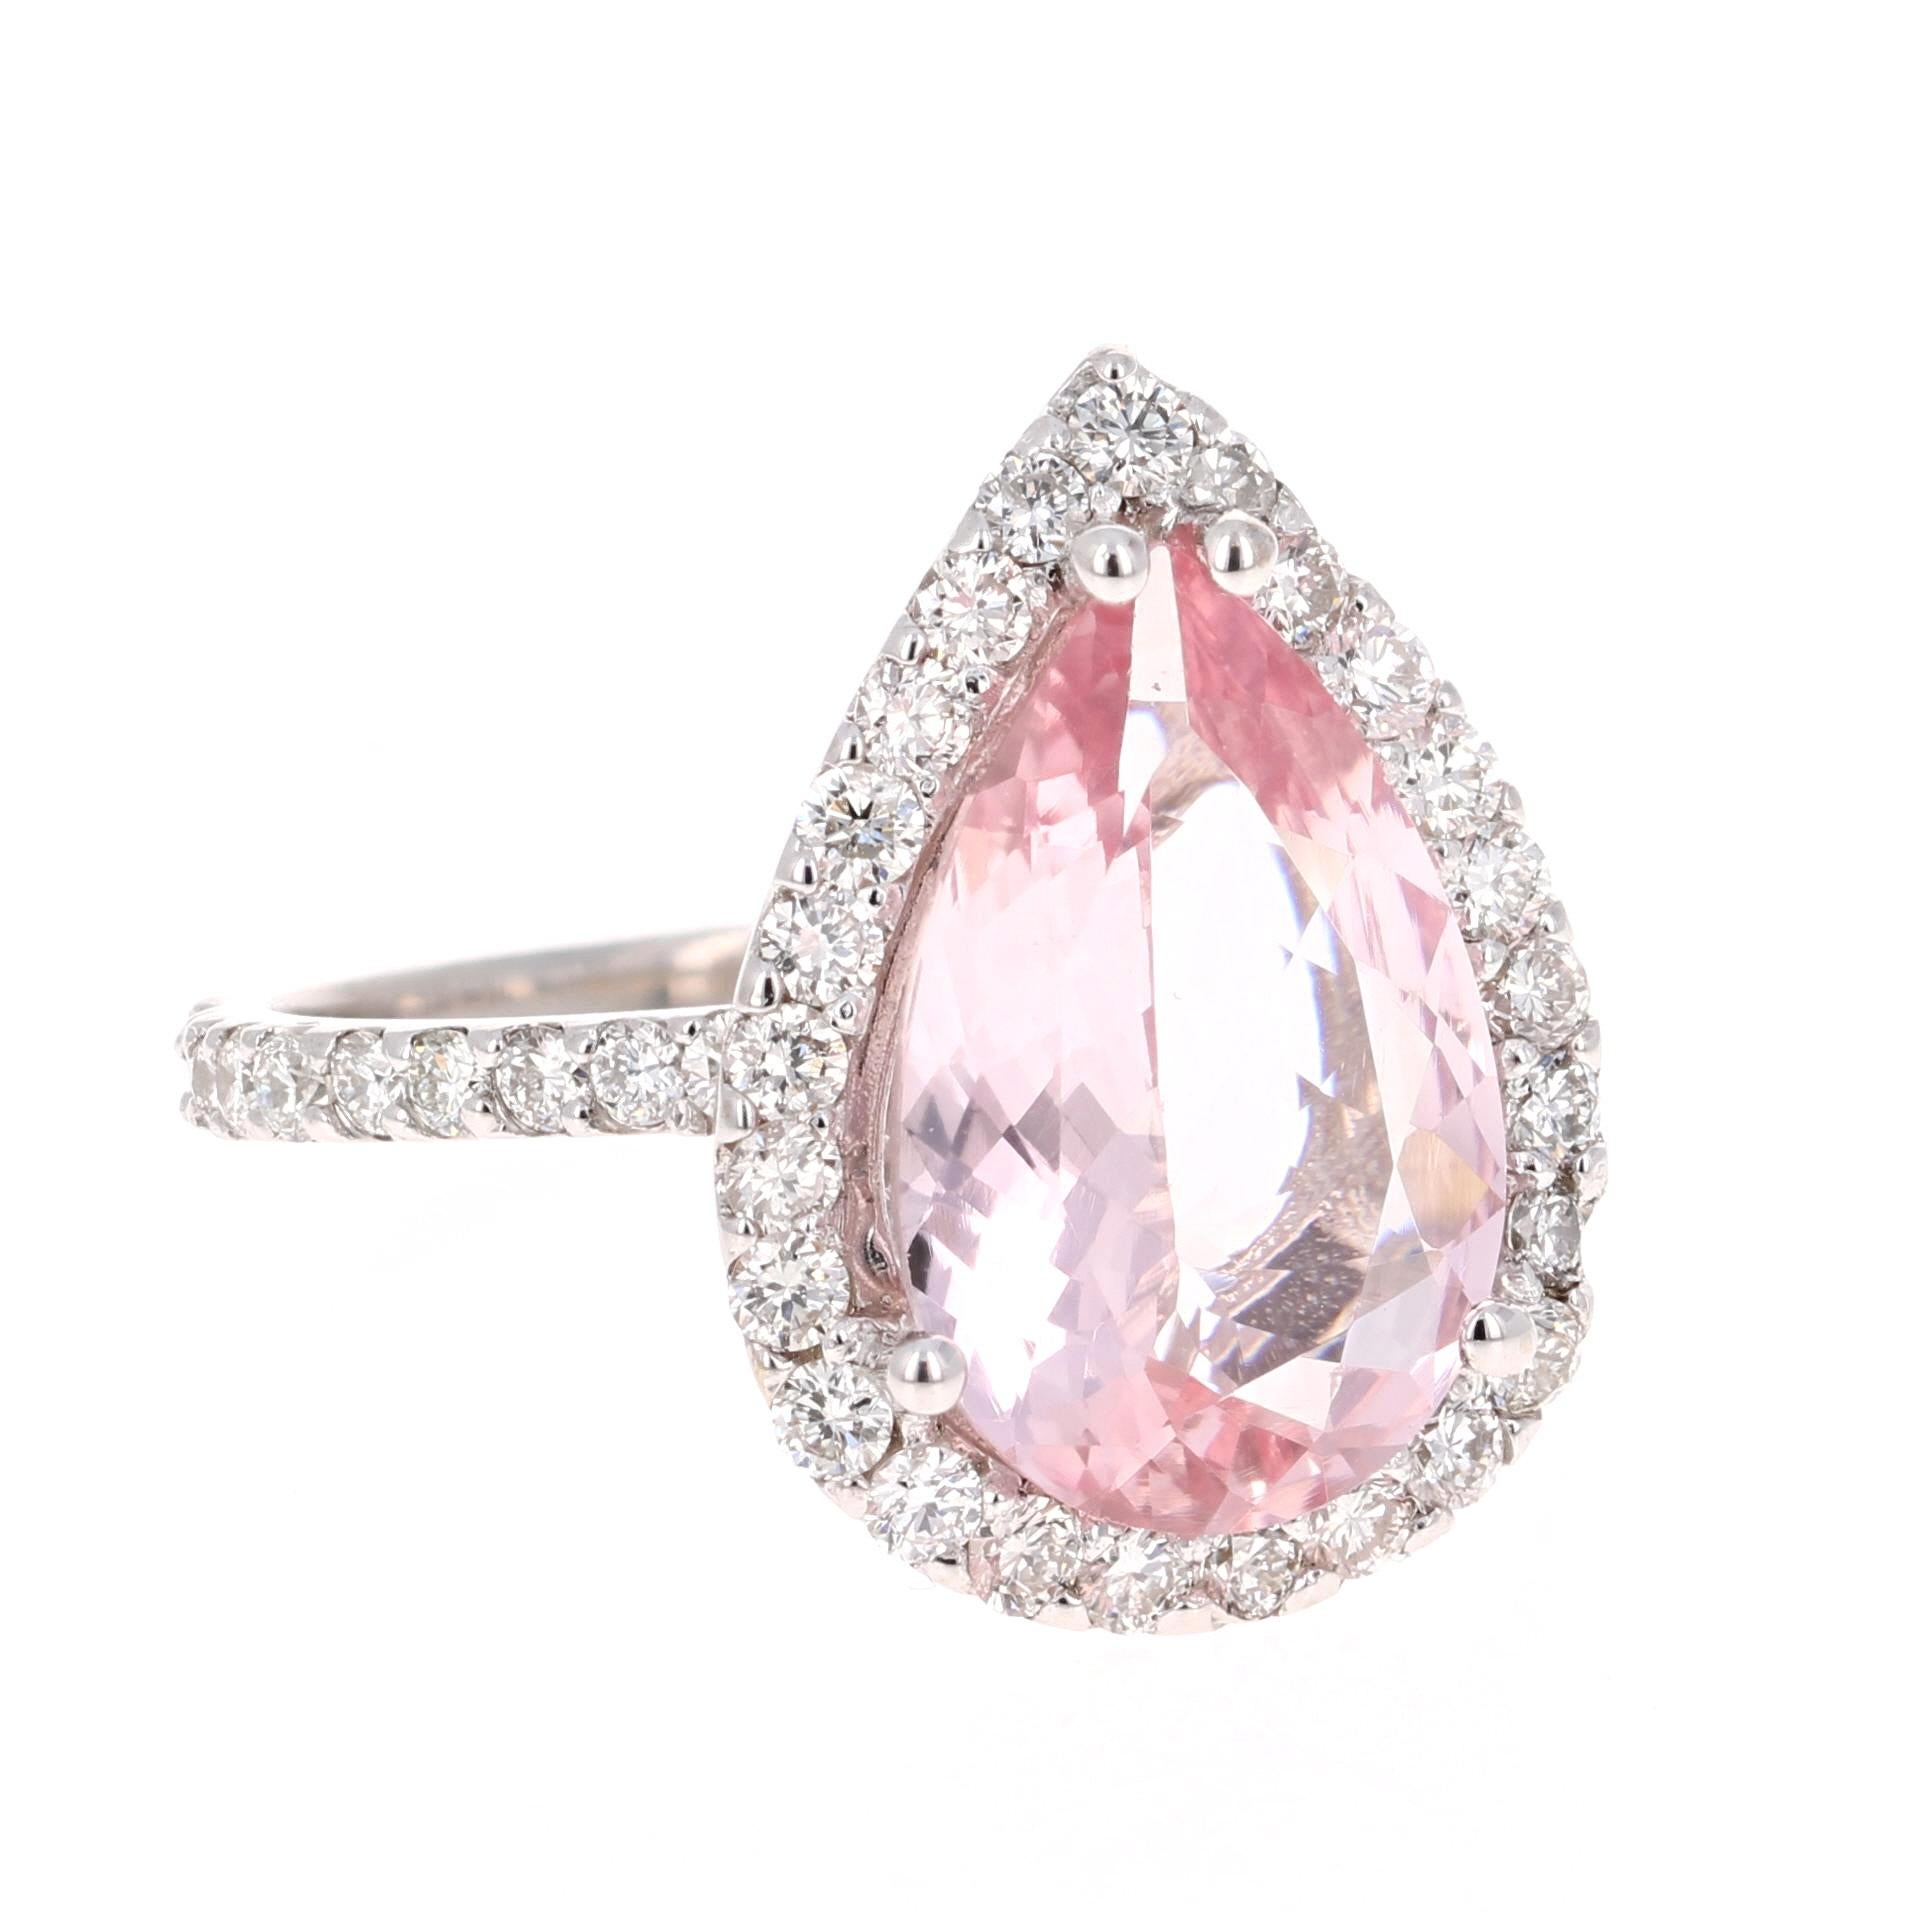 A lovely Engagement Ring Option or as an alternate to a Pink Diamond Ring! 

This gorgeous and classy Morganite Diamond Ring has a 3.19 Carat Pear Cut Pink Morganite and has 47 Round Cut Diamonds that weigh 0.92 carats (Clarity: VS2, Color: H). The